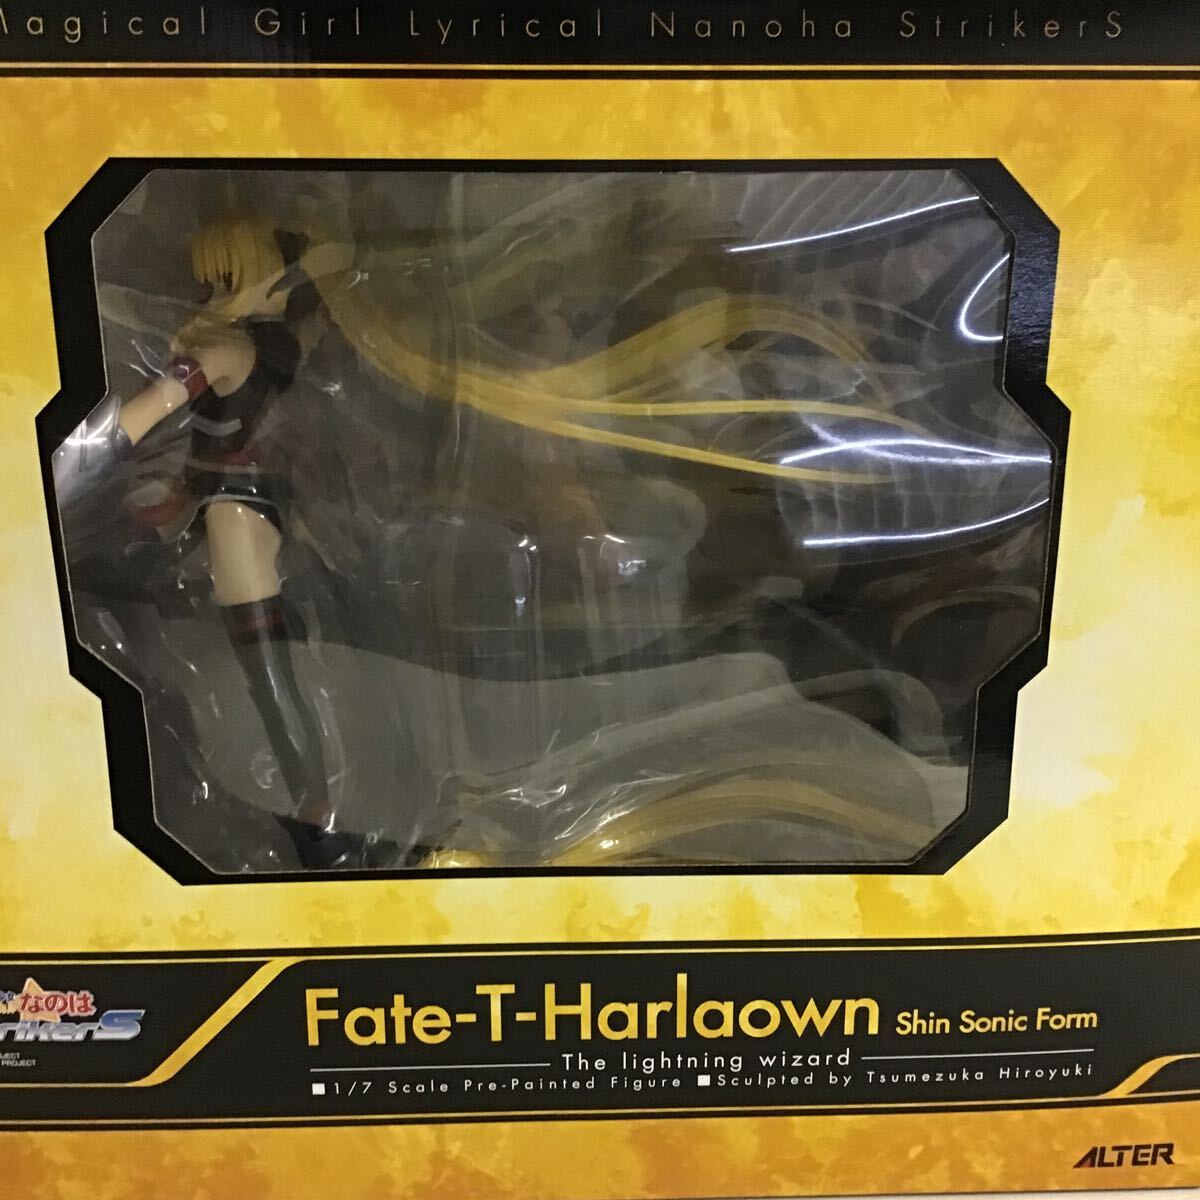 41[ breaking the seal settled equipped ] Magical Girl Lyrical Nanoha li Zero tent Live other beautiful young lady figure scale figure prize gift summarize (160)